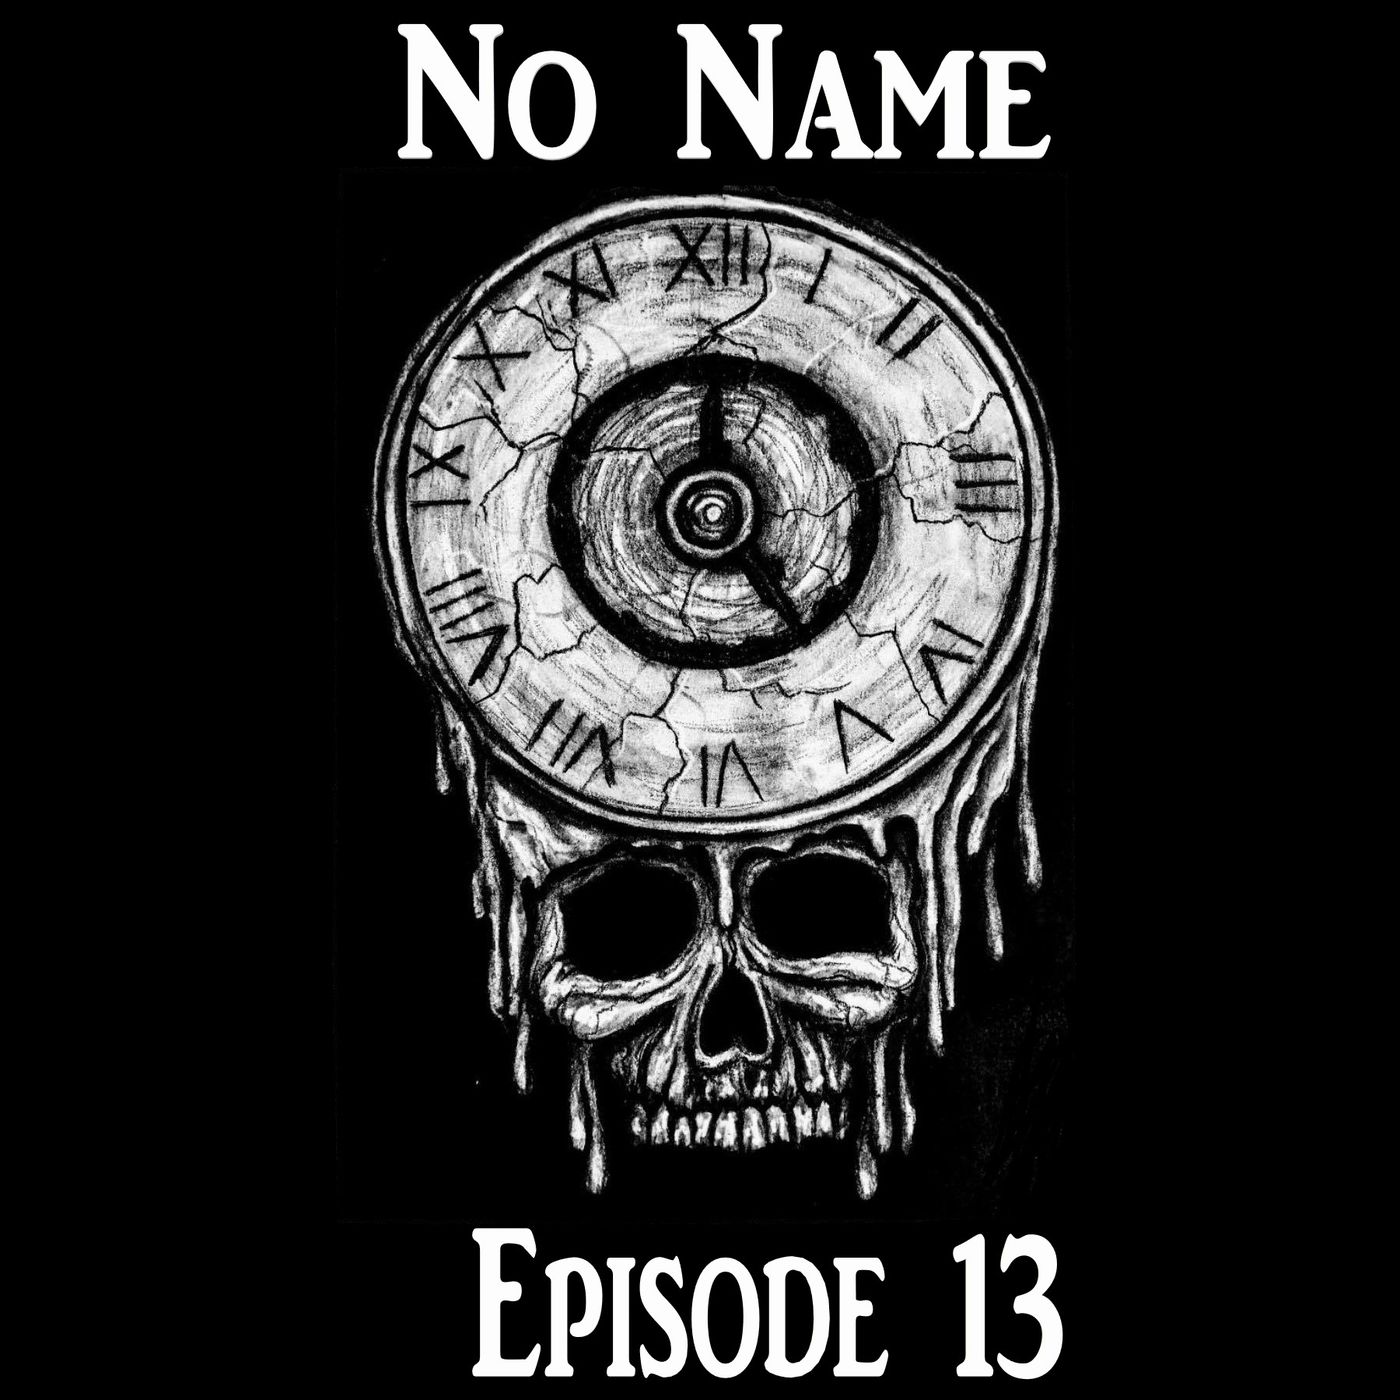 Episode 13: Time to Die